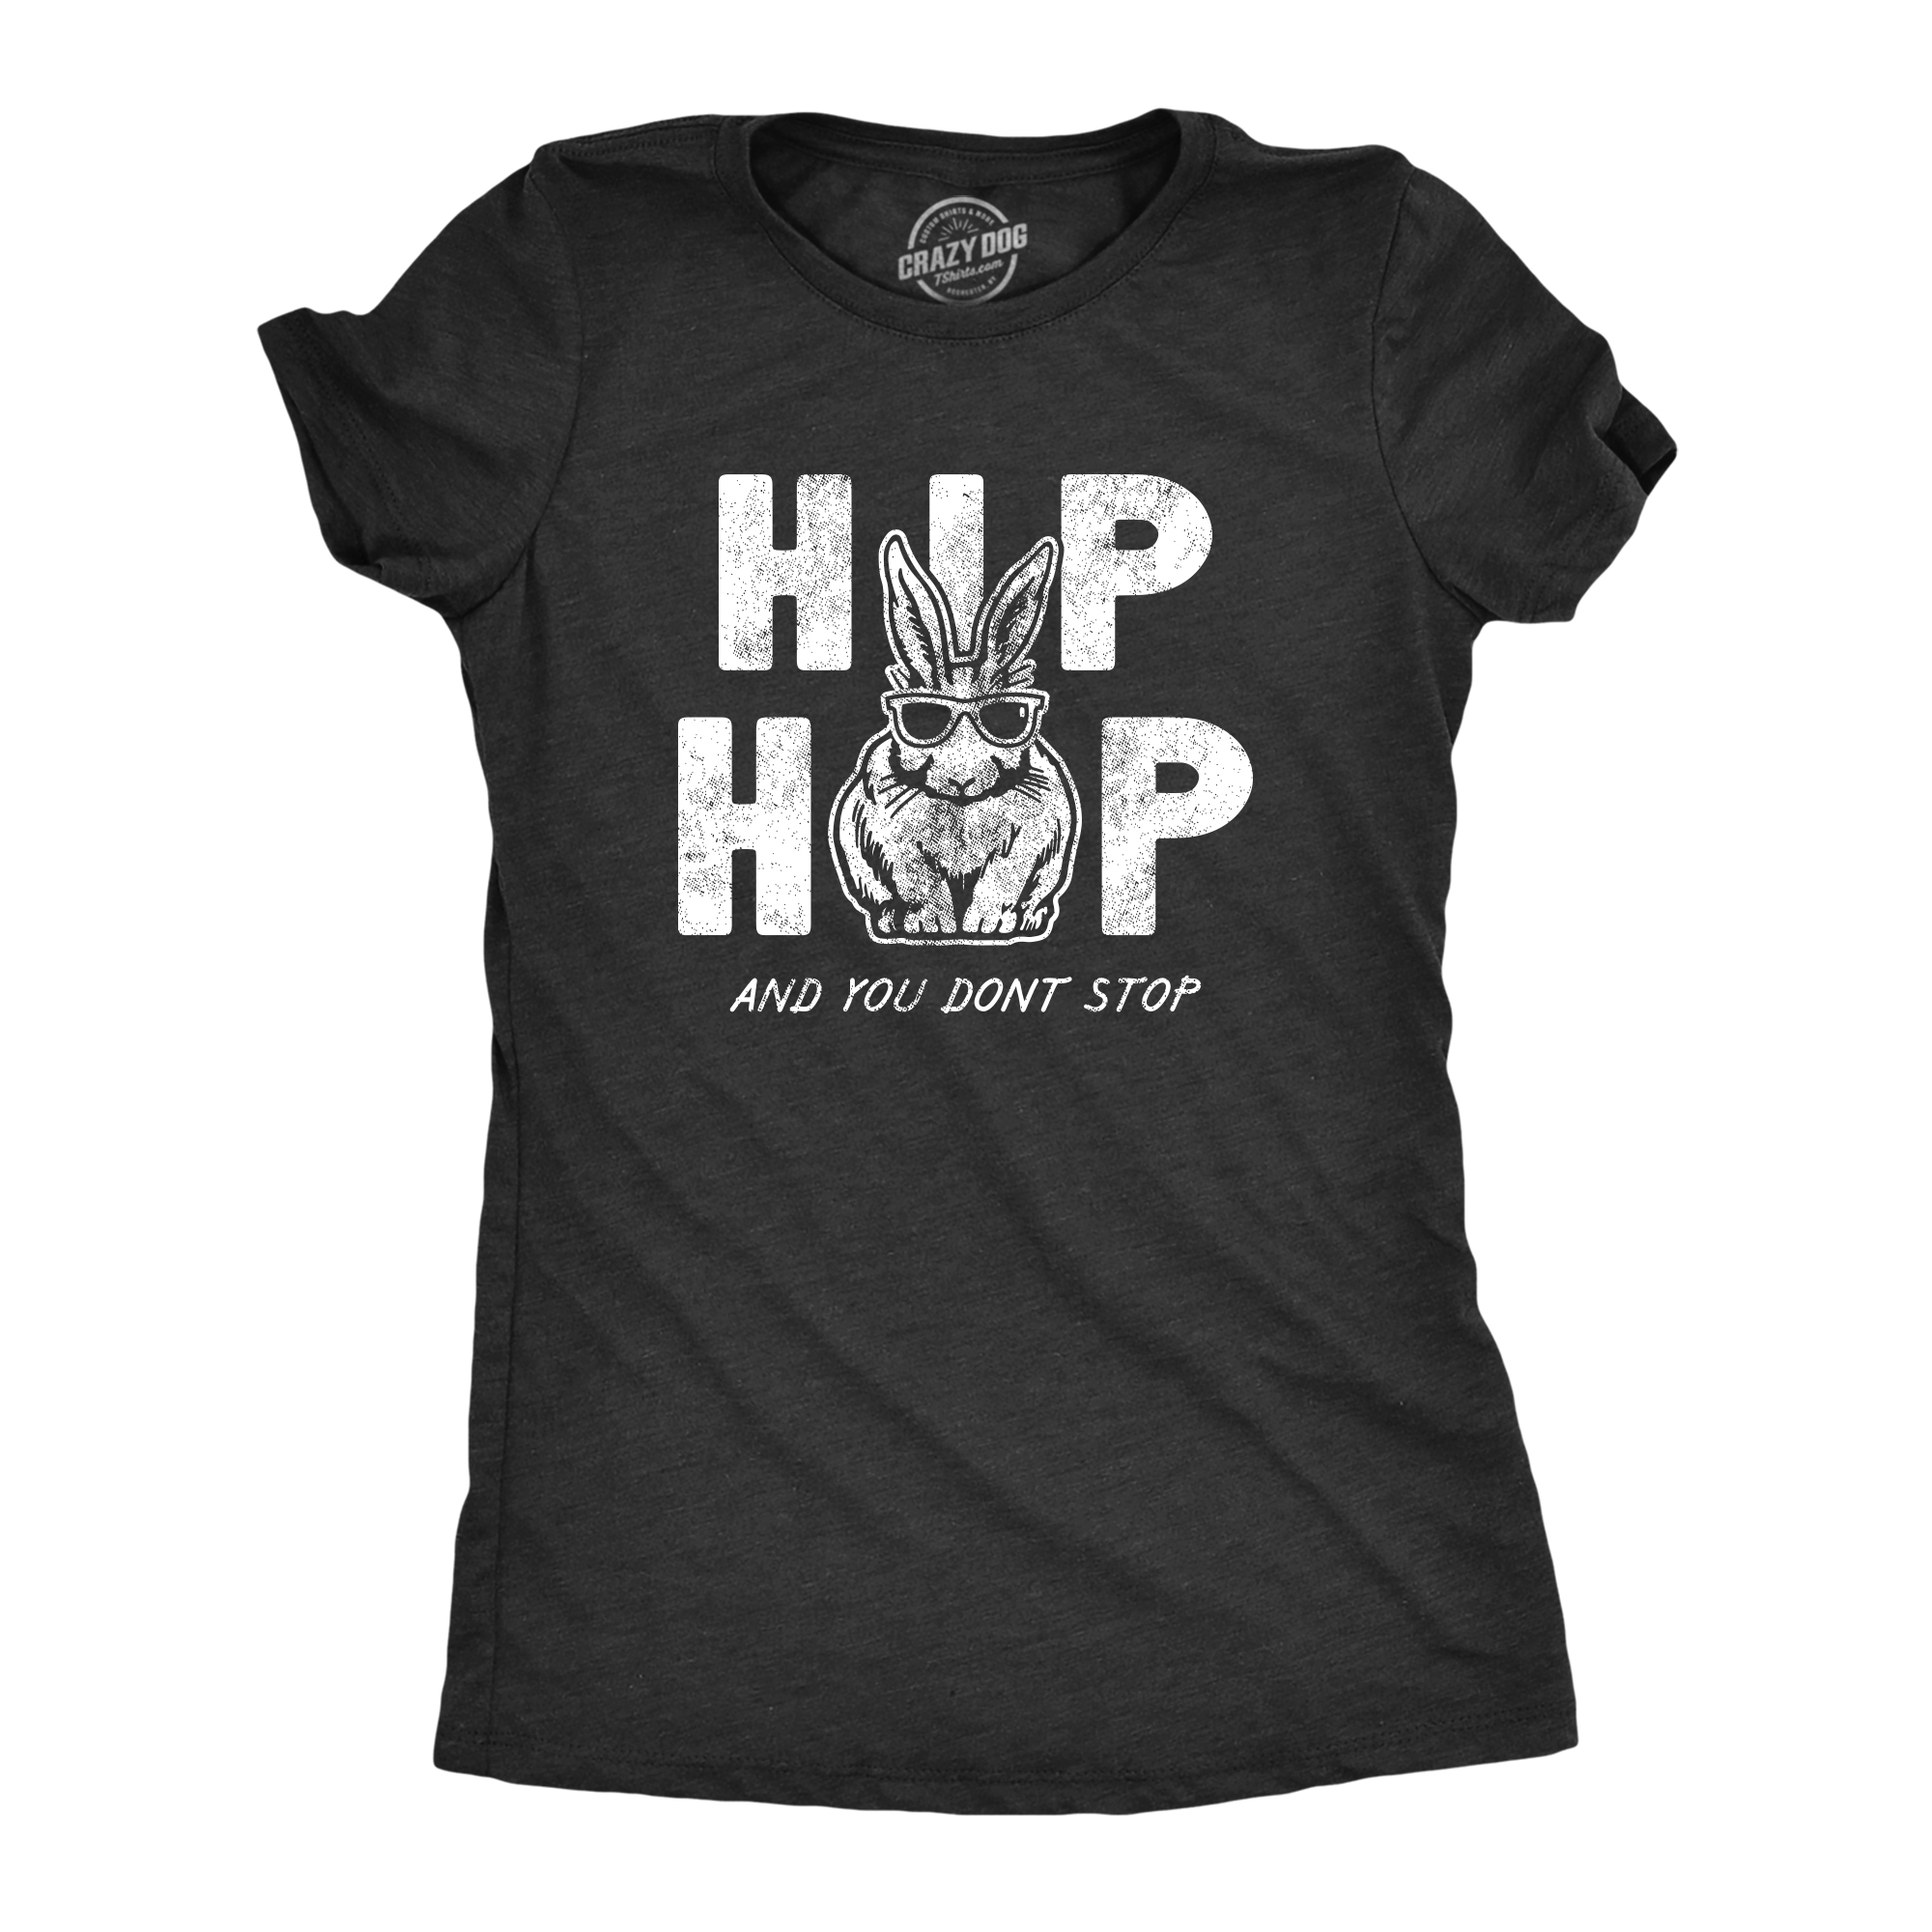 Crazy Dog Tshirts Womens Hip Hop And You Dont Stop T Shirt Funny Sarcatic Easter Bunny Novelty Tee For Guys